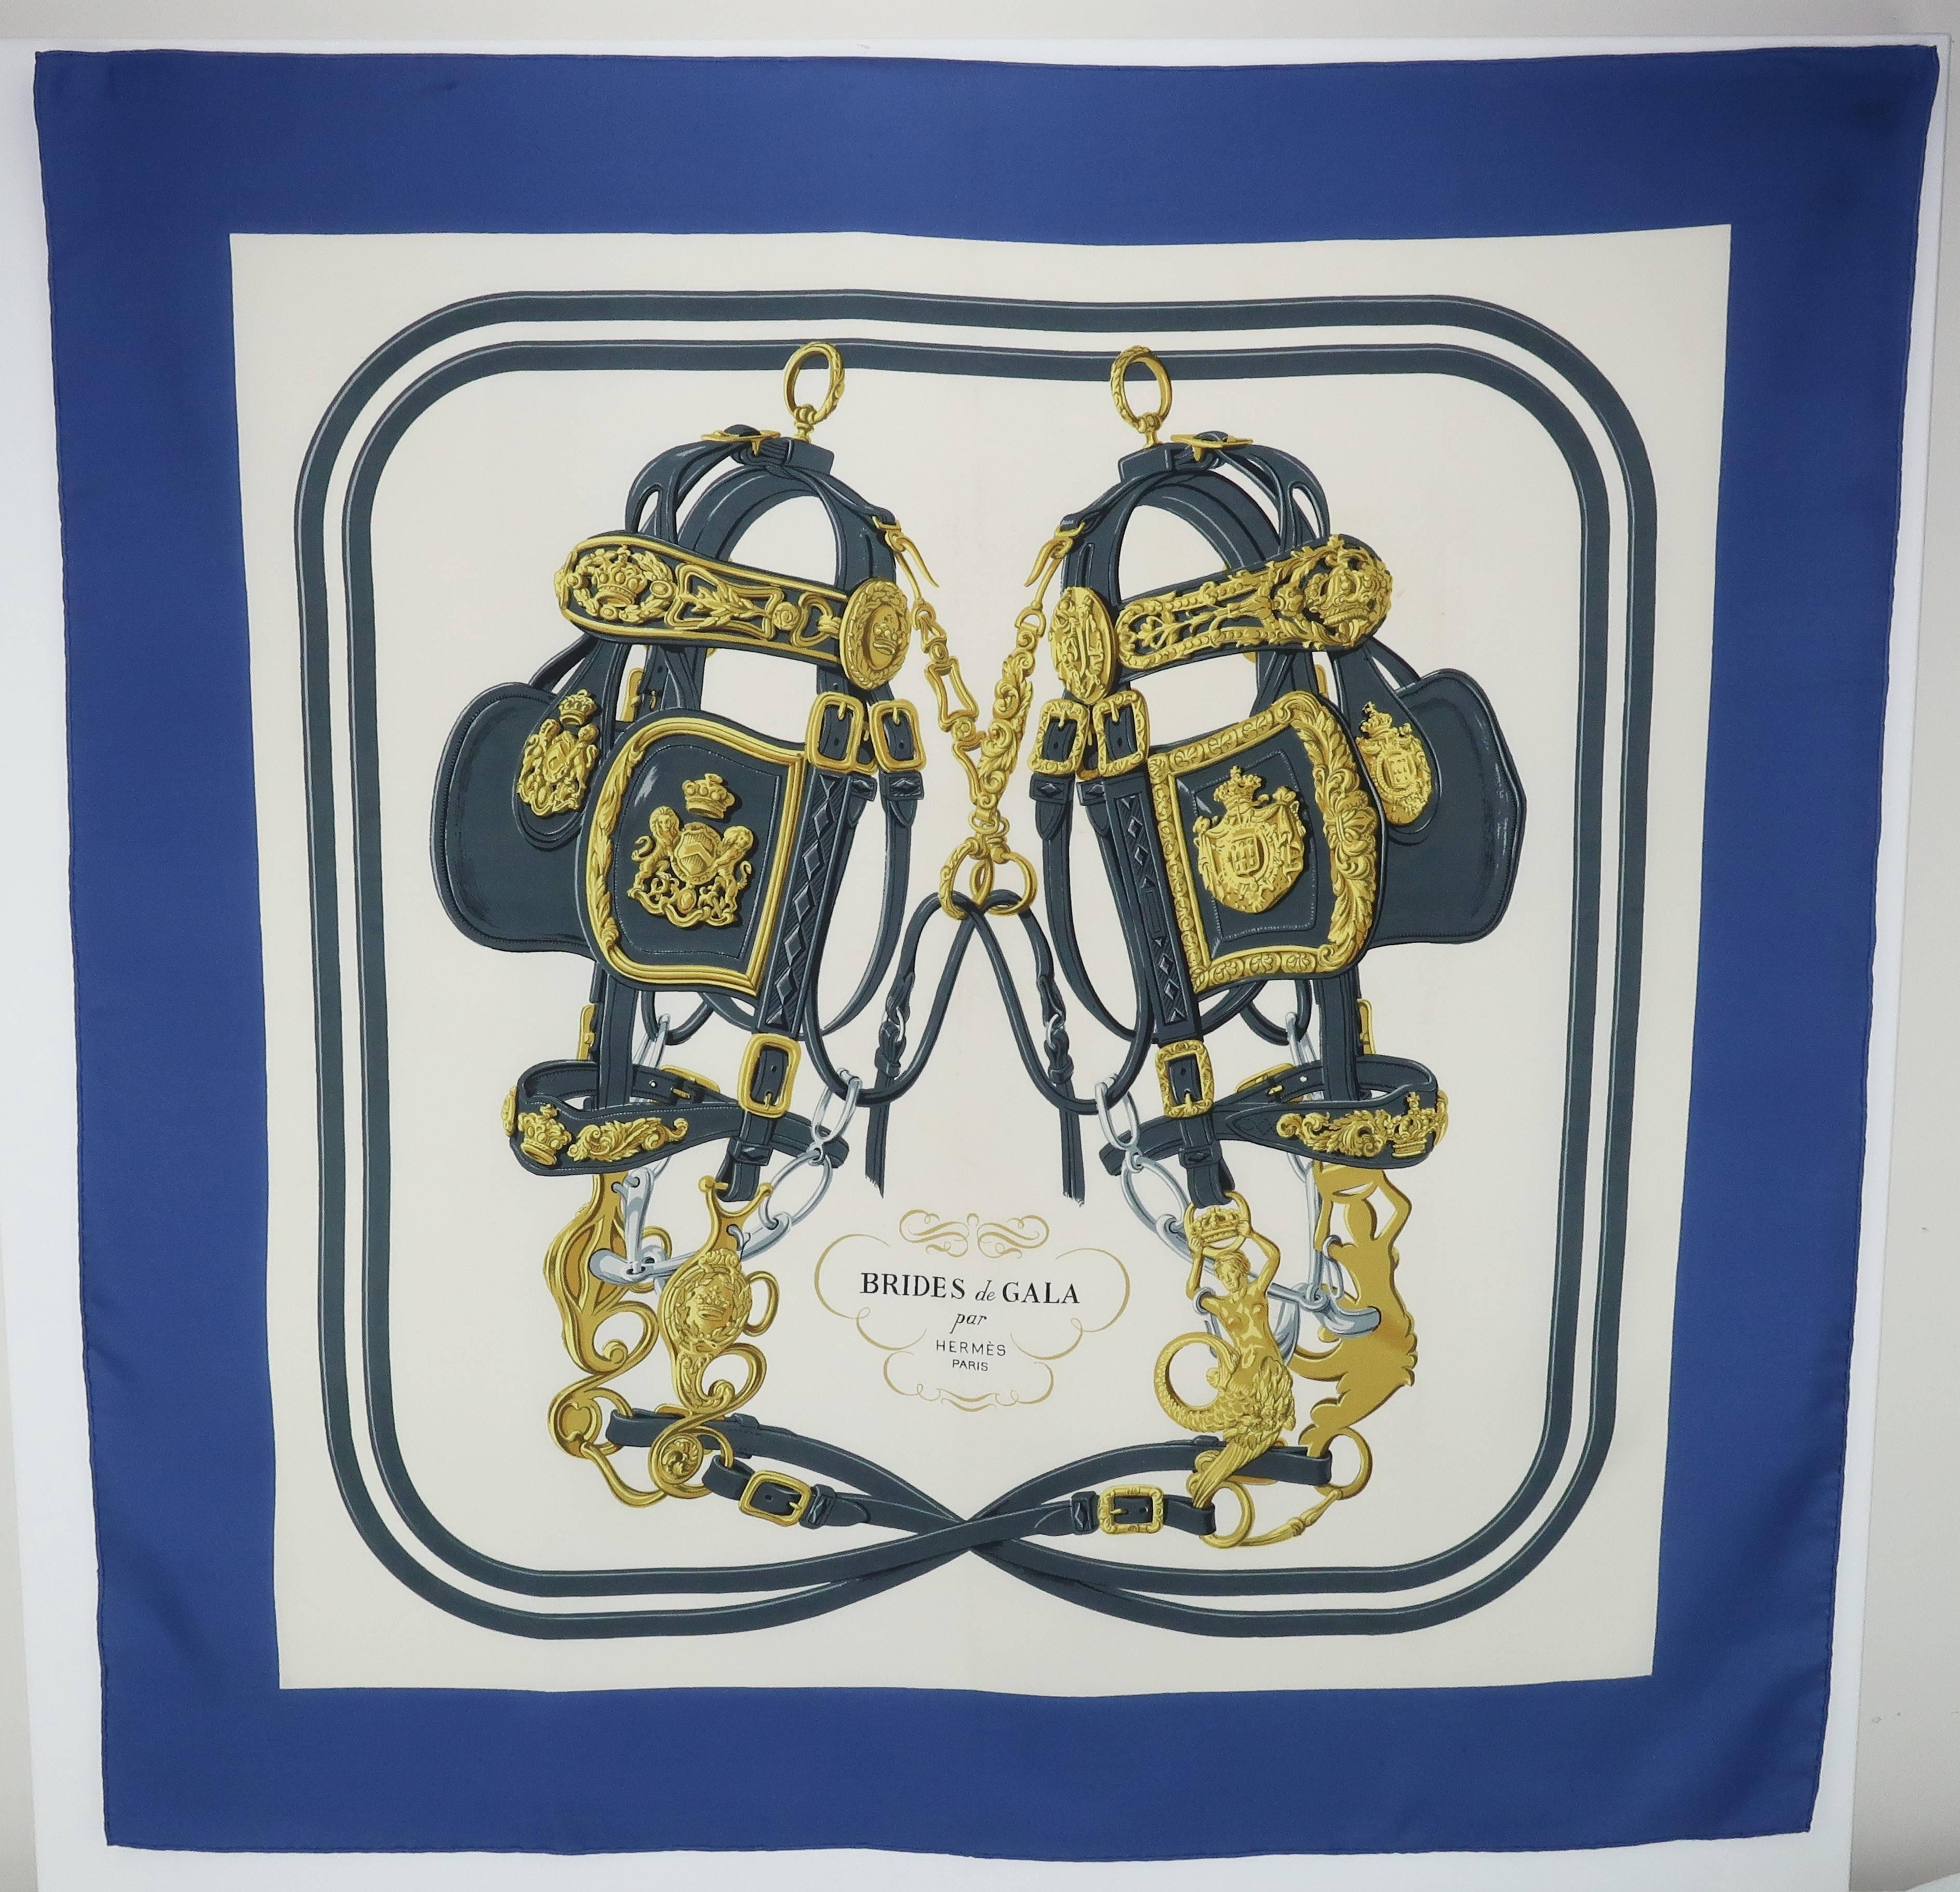 Often cited as one of Hermes' most popular scarf designs, the 'Brides de Gala' image has been worn by many fashionable ladies since its introduction by Hugo Grygkar in 1957.  This scarf was purchased by the original owner in Paris during the late